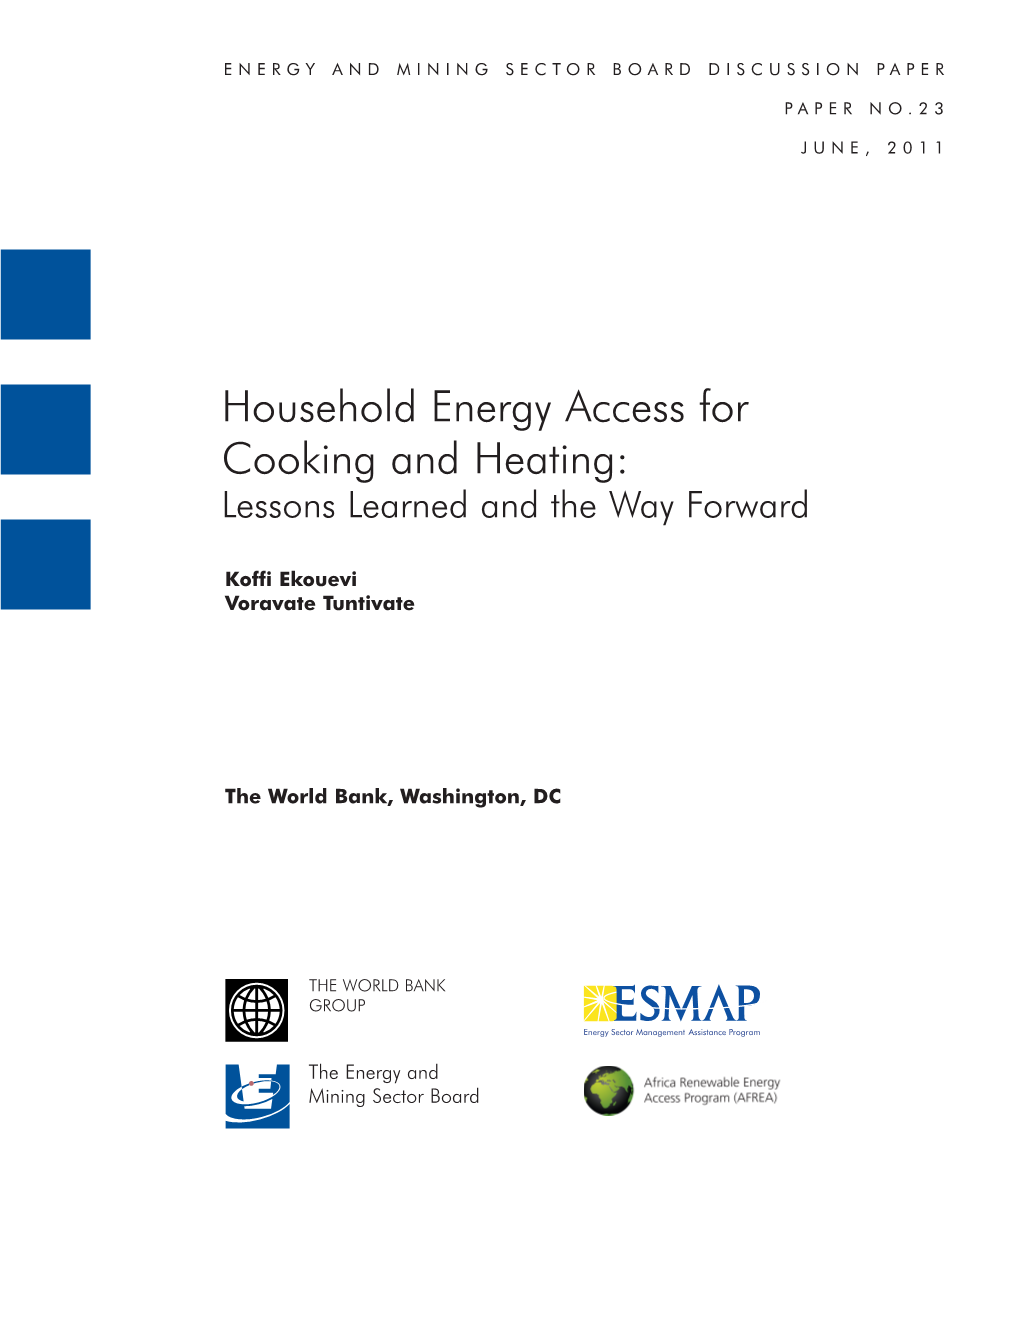 Household Energy Access for Cooking and Heating: Lessons Learned and the Way Forward